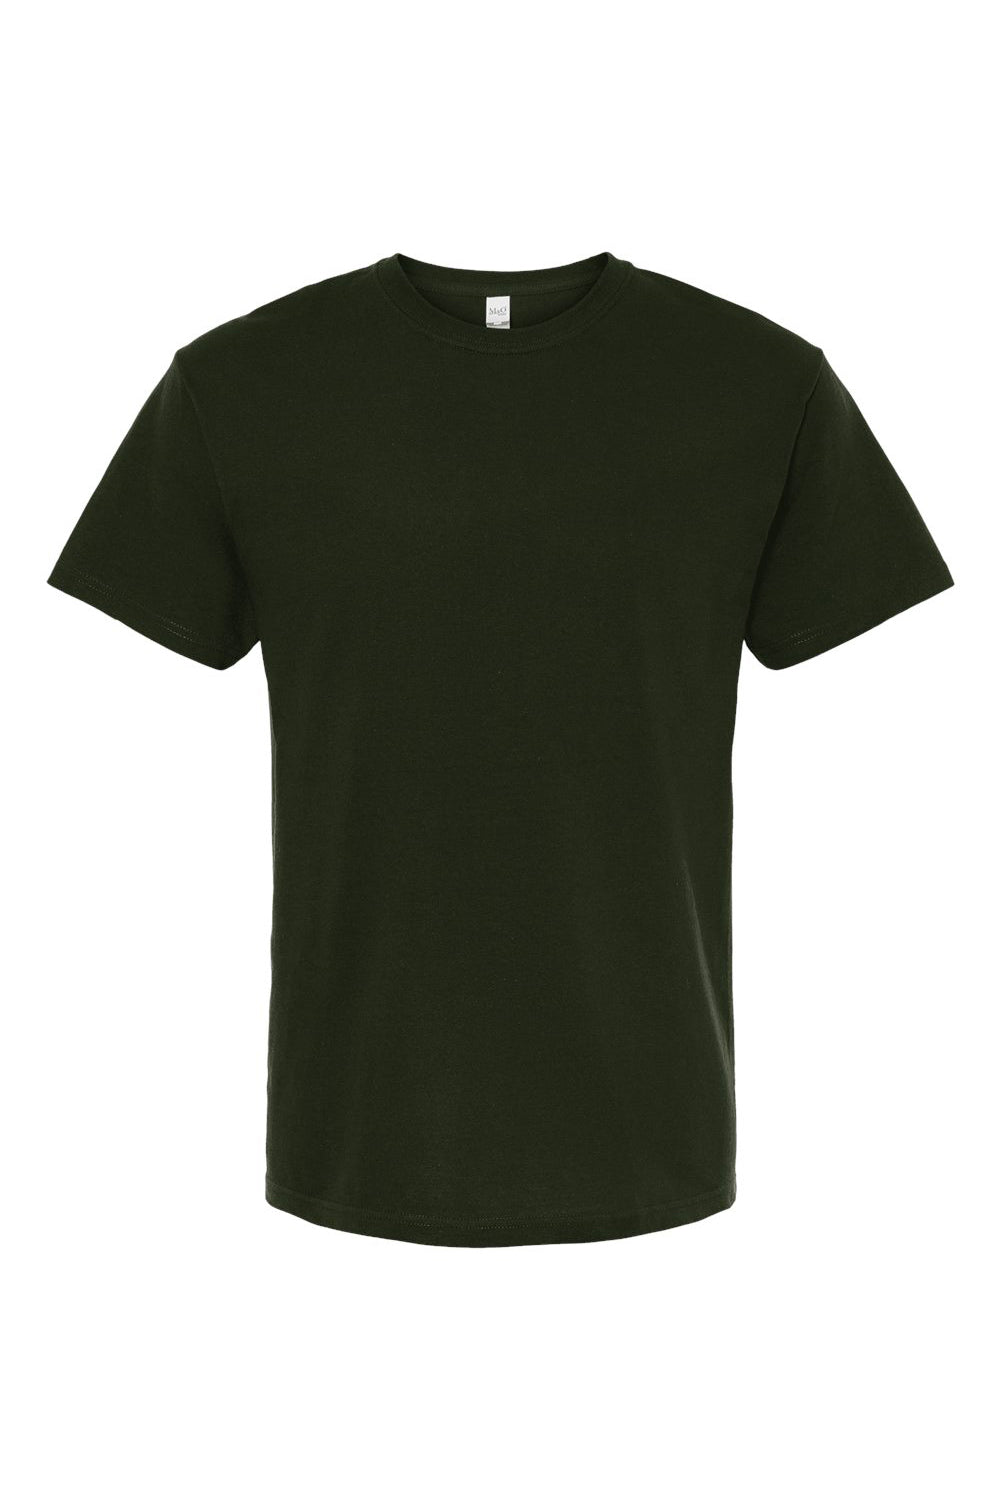 M&O 4800 Mens Gold Soft Touch Short Sleeve Crewneck T-Shirt Forest Green Flat Front